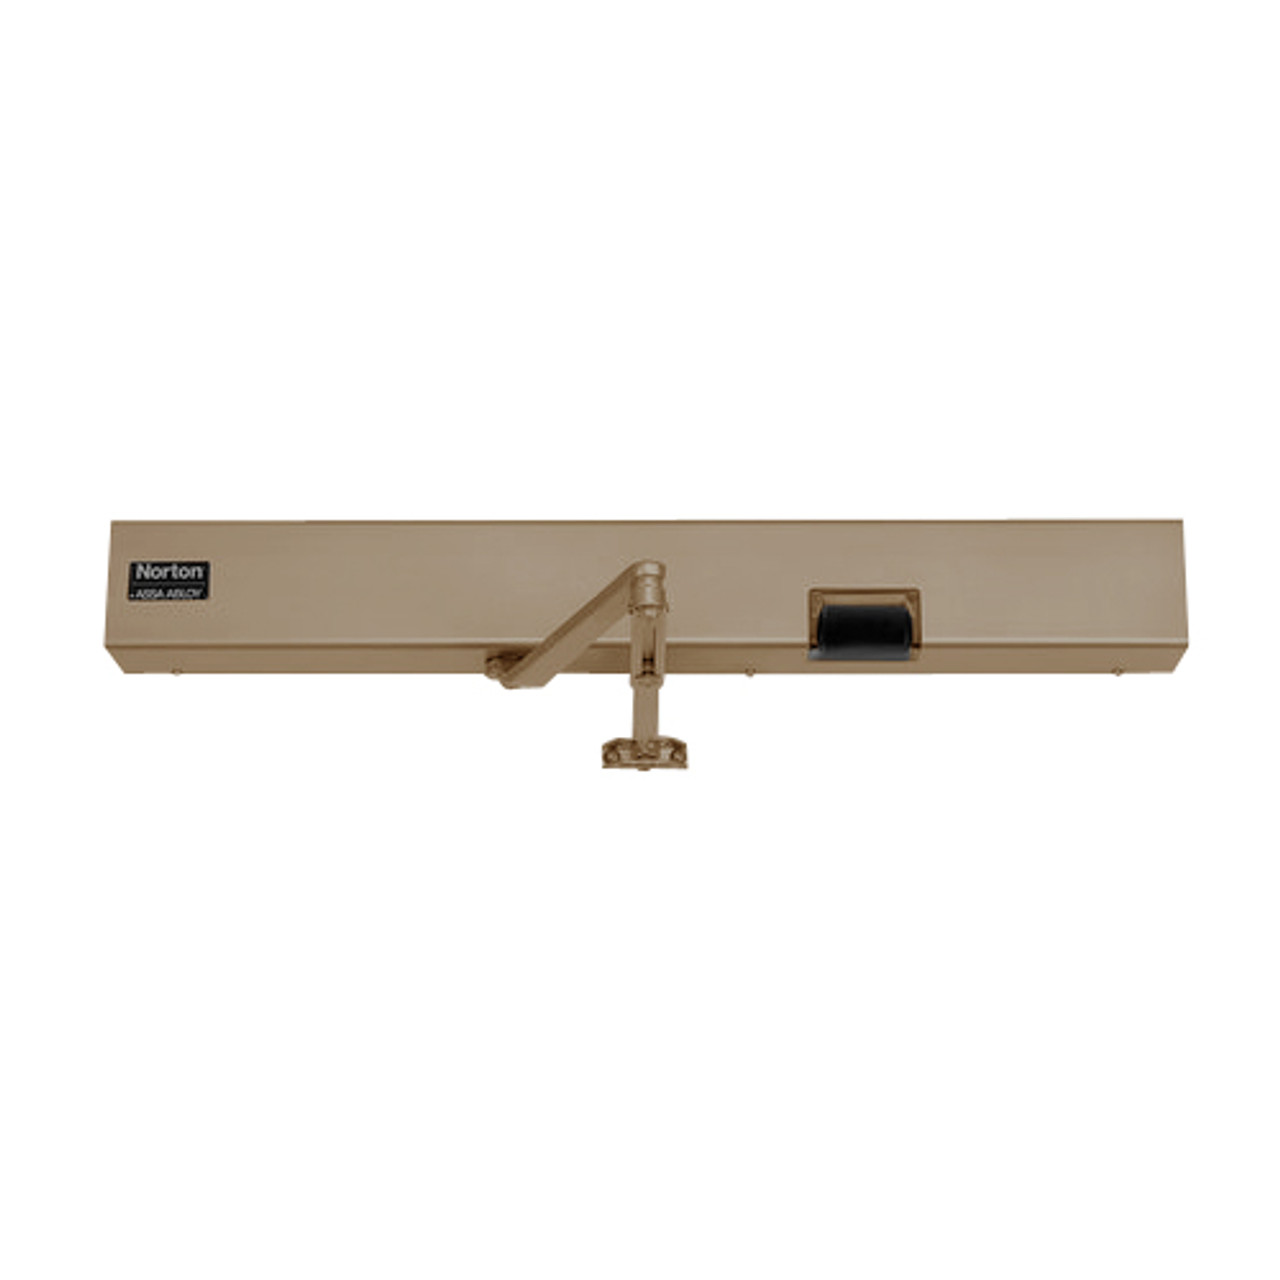 7135SZ-LH-120VAC-691 Norton 7100SZ Series Safe Zone Multi-Point Closer/Holder with Motion Sensor and Push Side Double Lever 13-1/2 inch Main Arm in Dull Bronze Finish